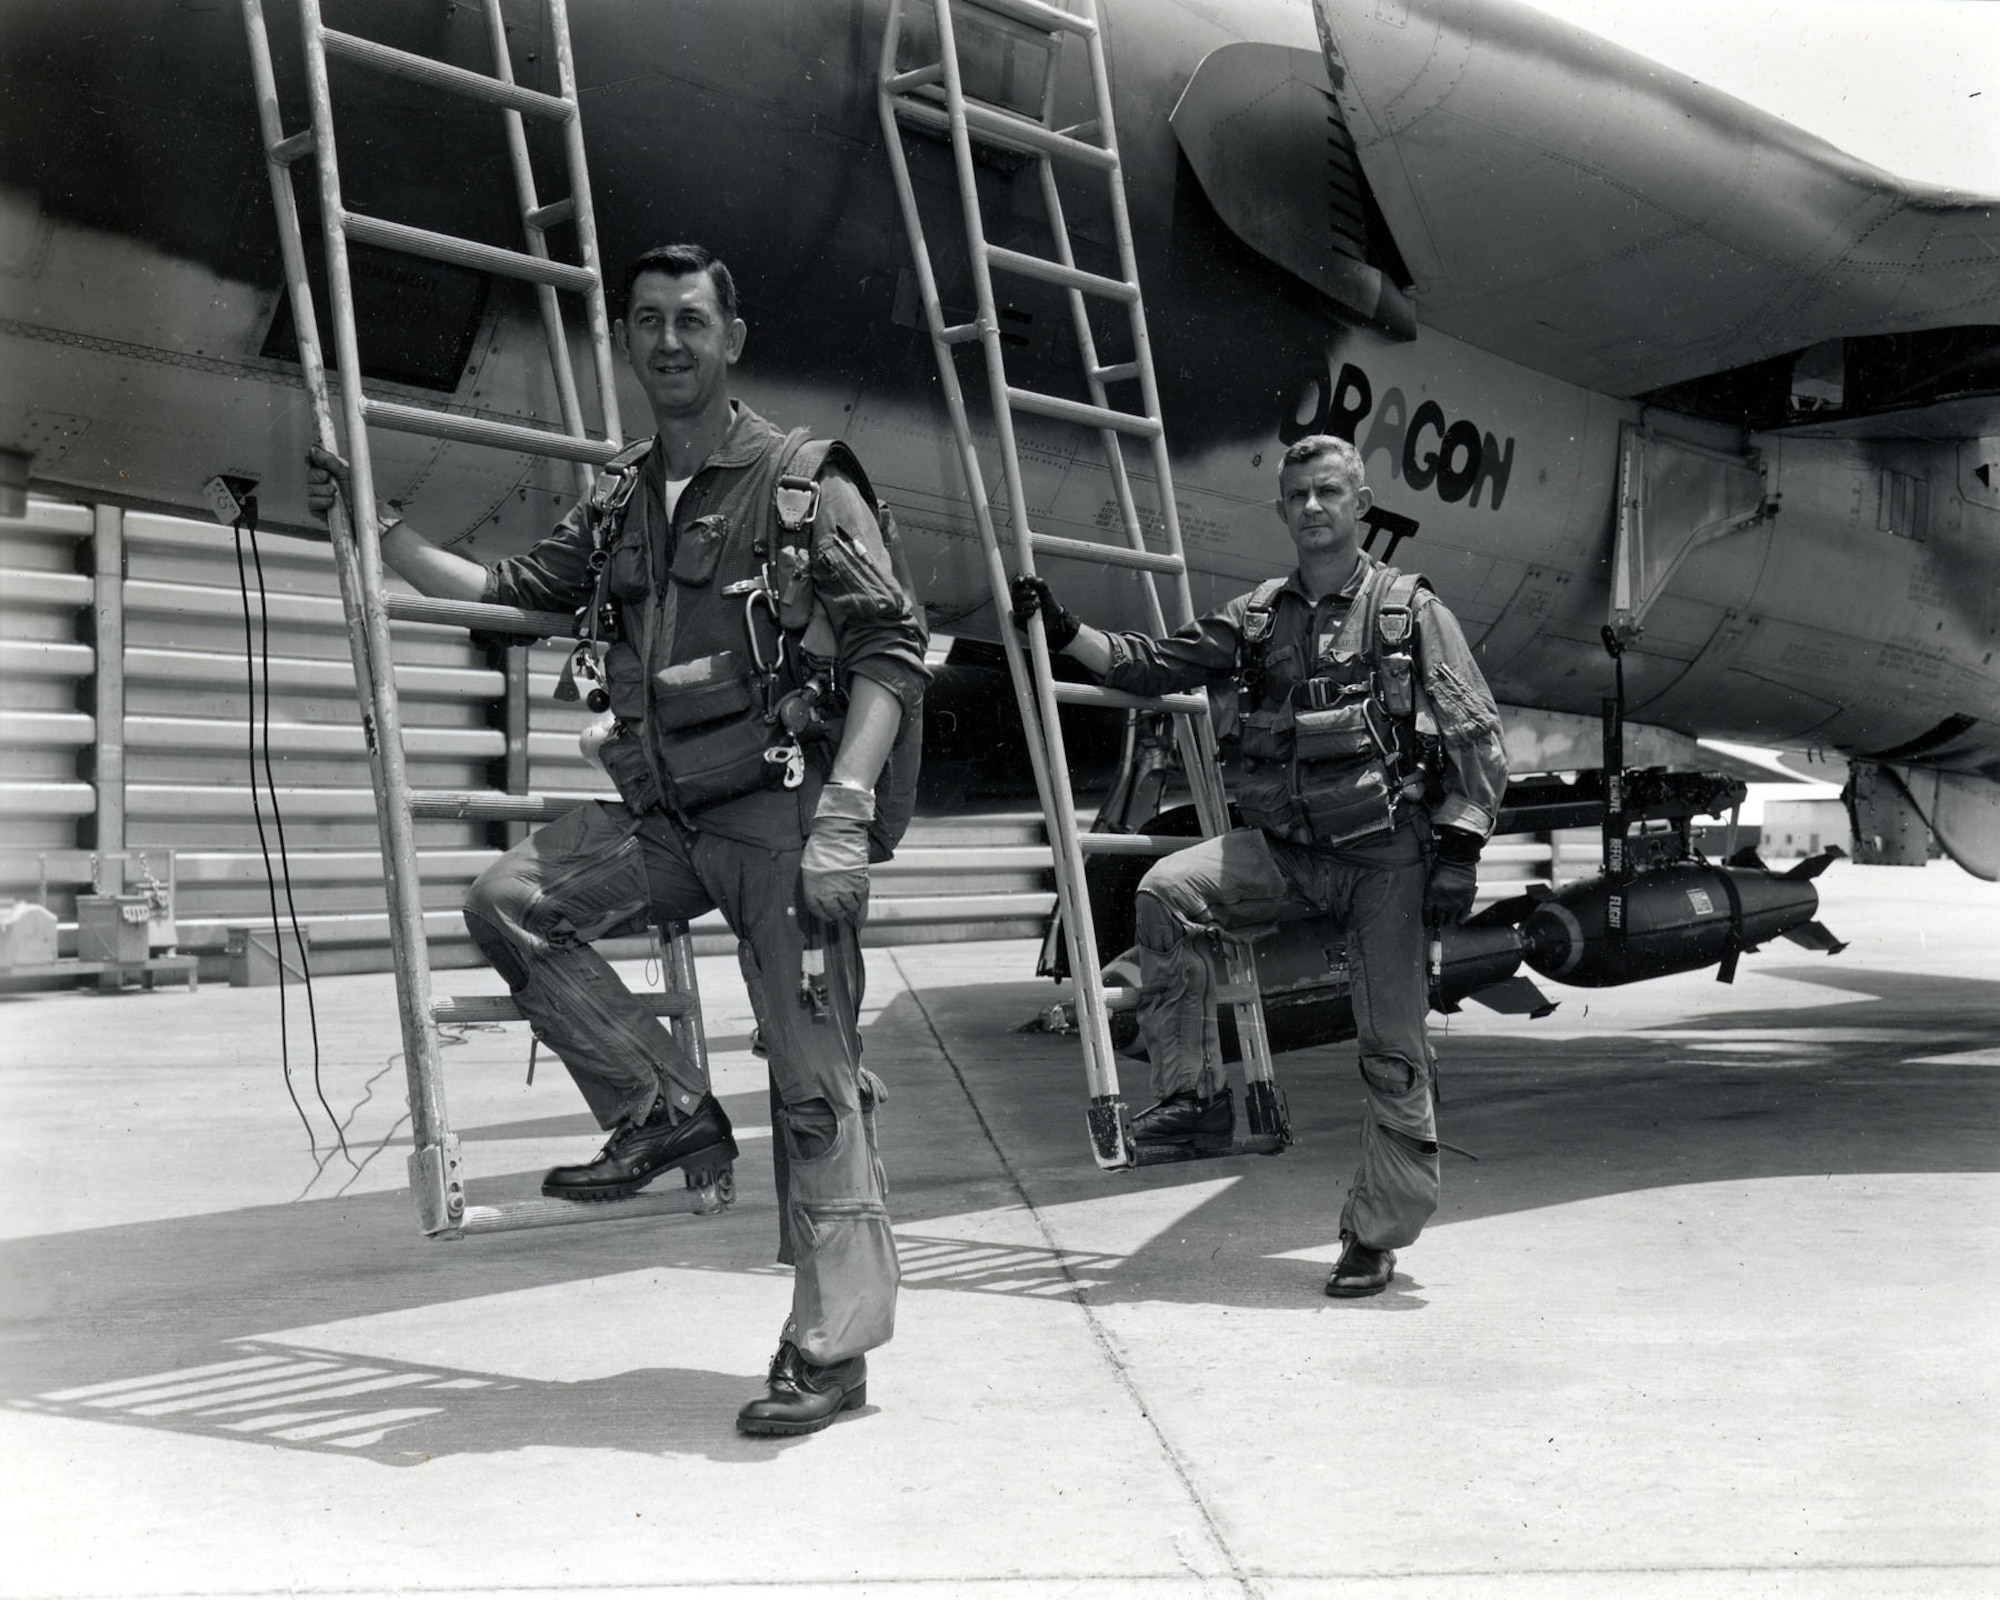 In April, they went to Korat and flew F-105F Wild Weasel missions over North Vietnam with the 44th Tactical Fighter Squadron of the 388th Tactical Fighter Wing. (U.S. Air Force photo)